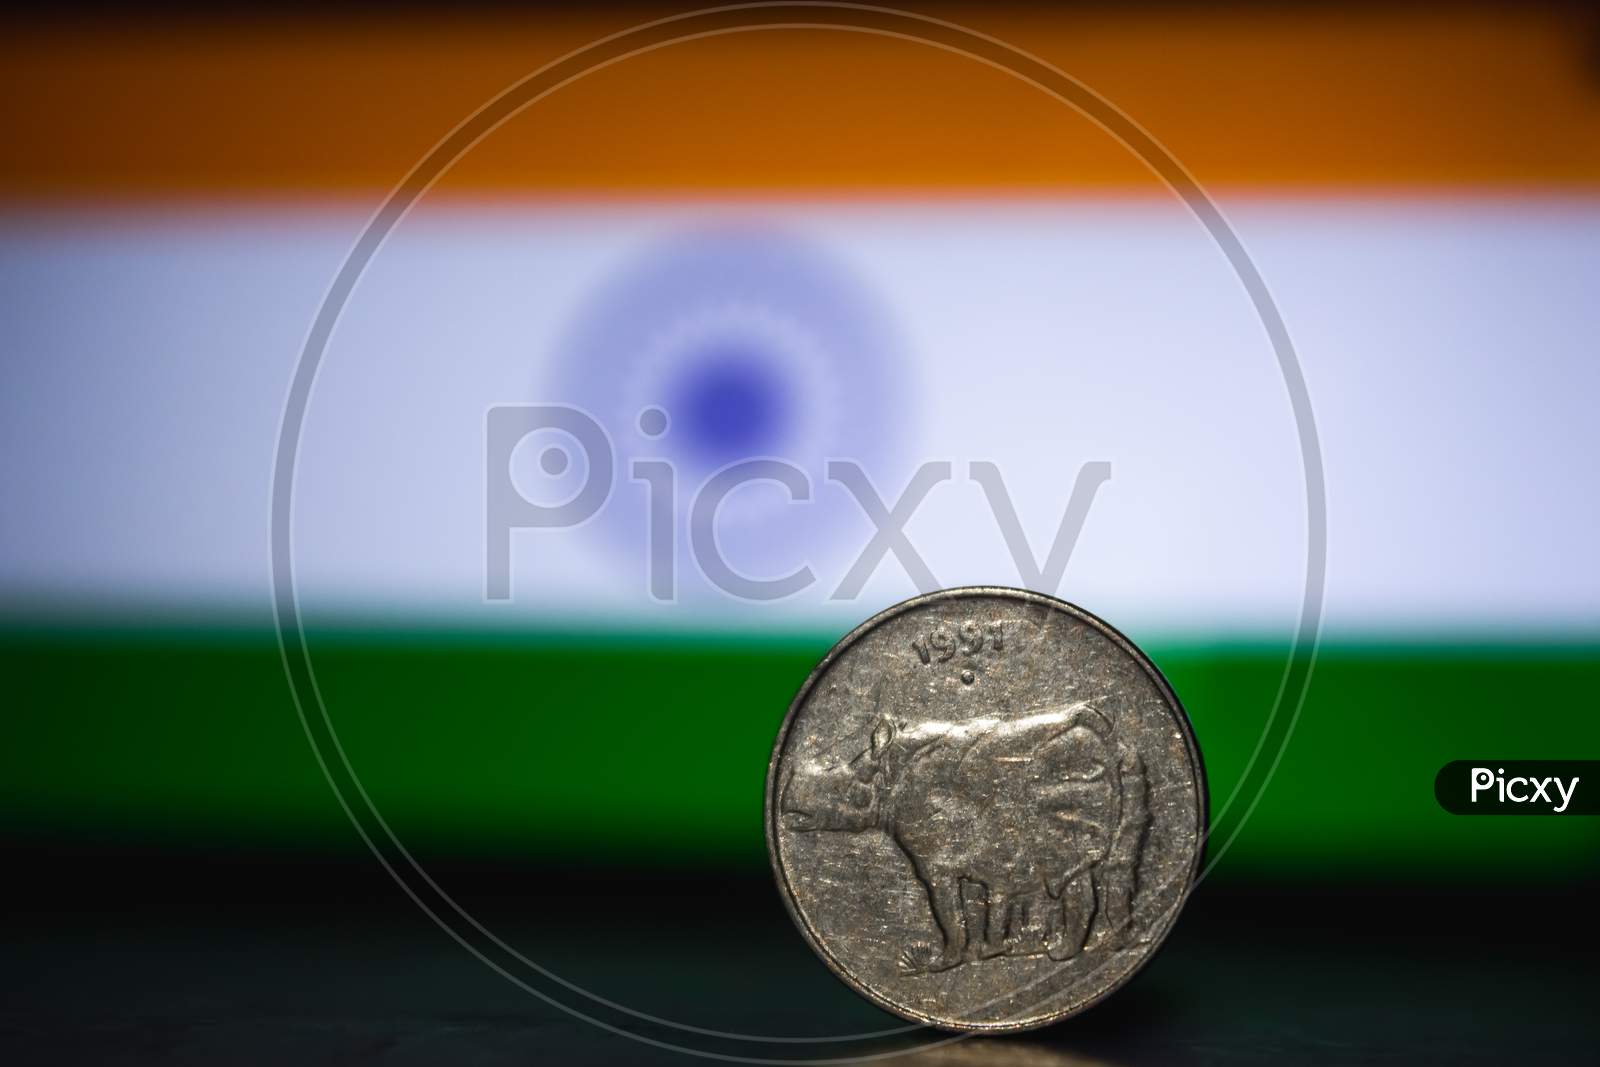 Indian Currency - Indian Twenty Paisa Coin Rupee Isolated On India Flag Background. Old 25 Paisa Coin 1979 With Space For Copy Text.